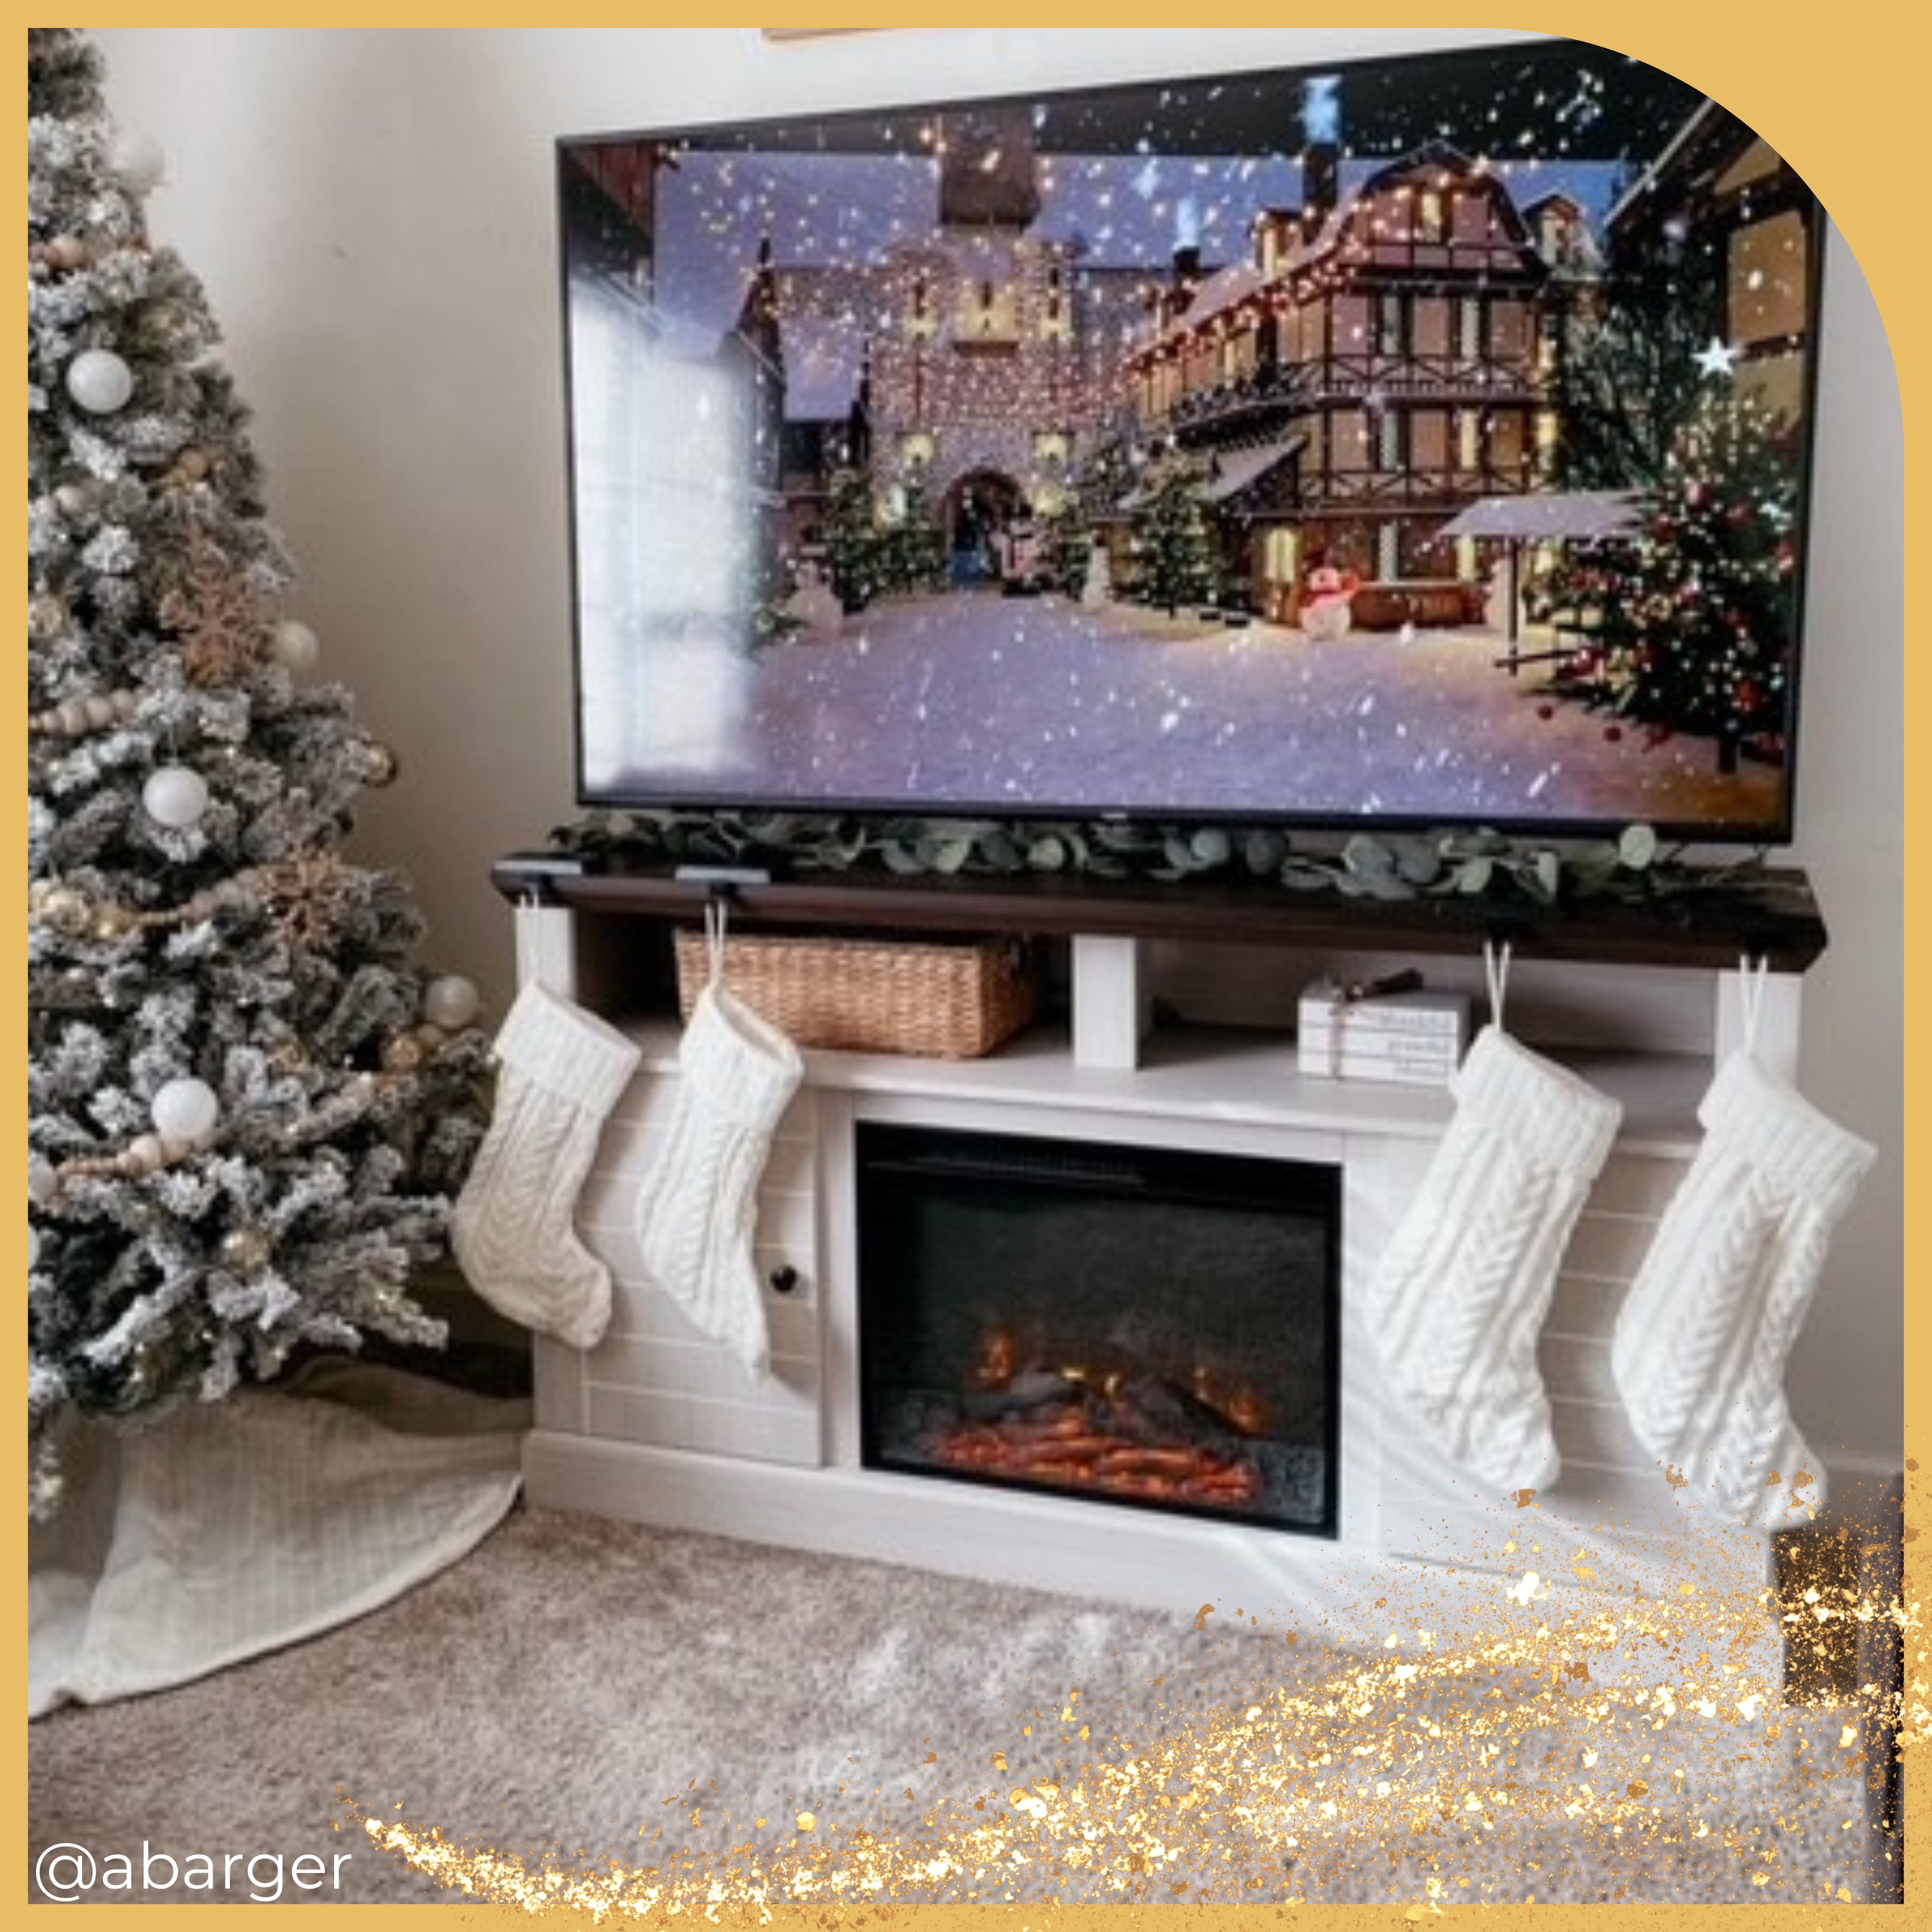 the tv console and electric fireplace is used as a winter holiday mantel with stockings